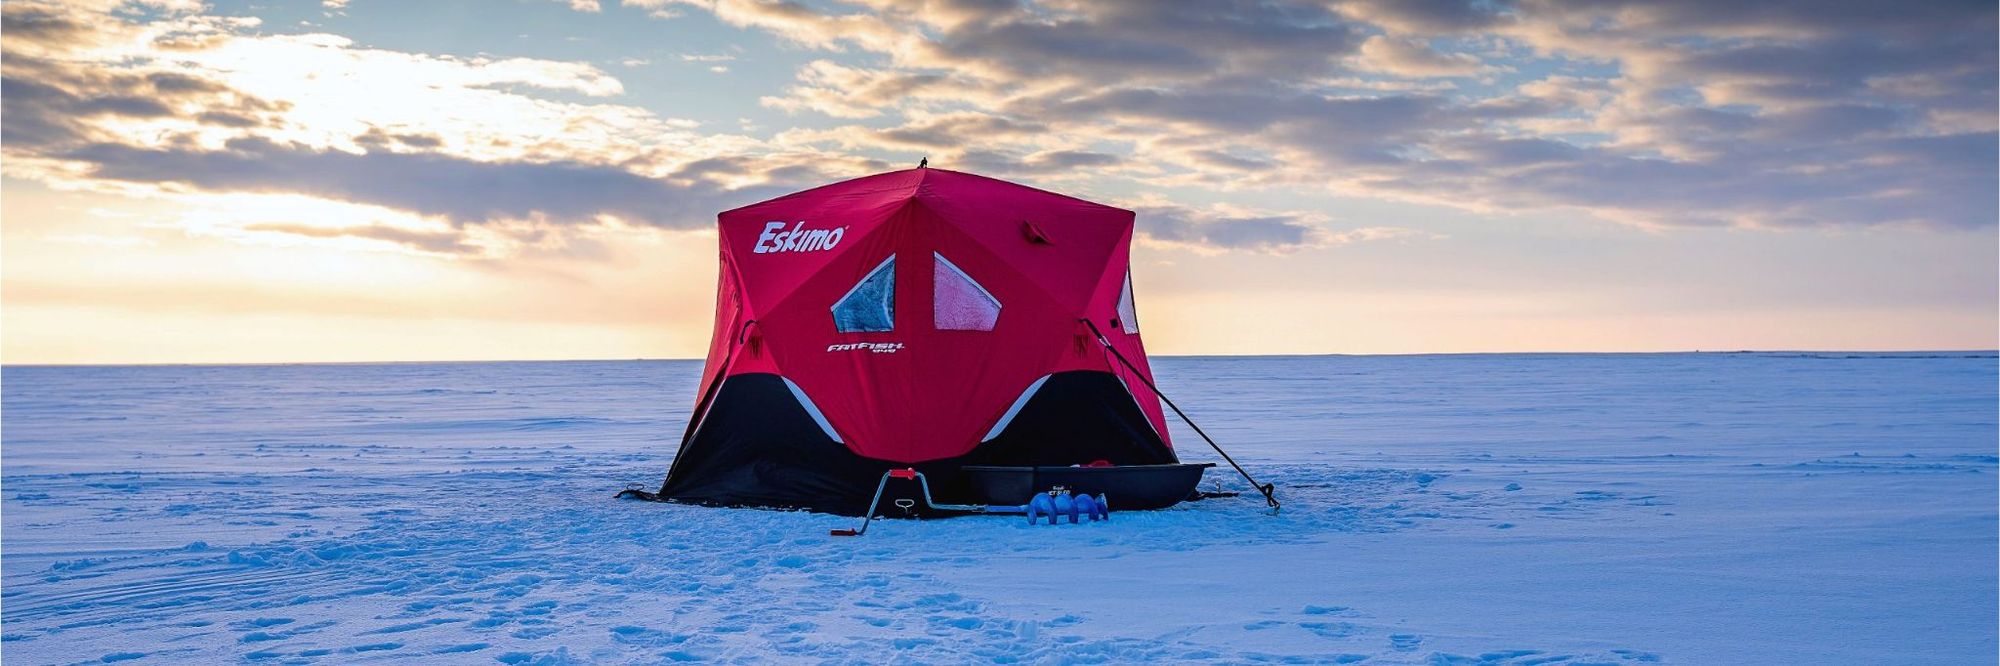 A securely anchored ice shelter